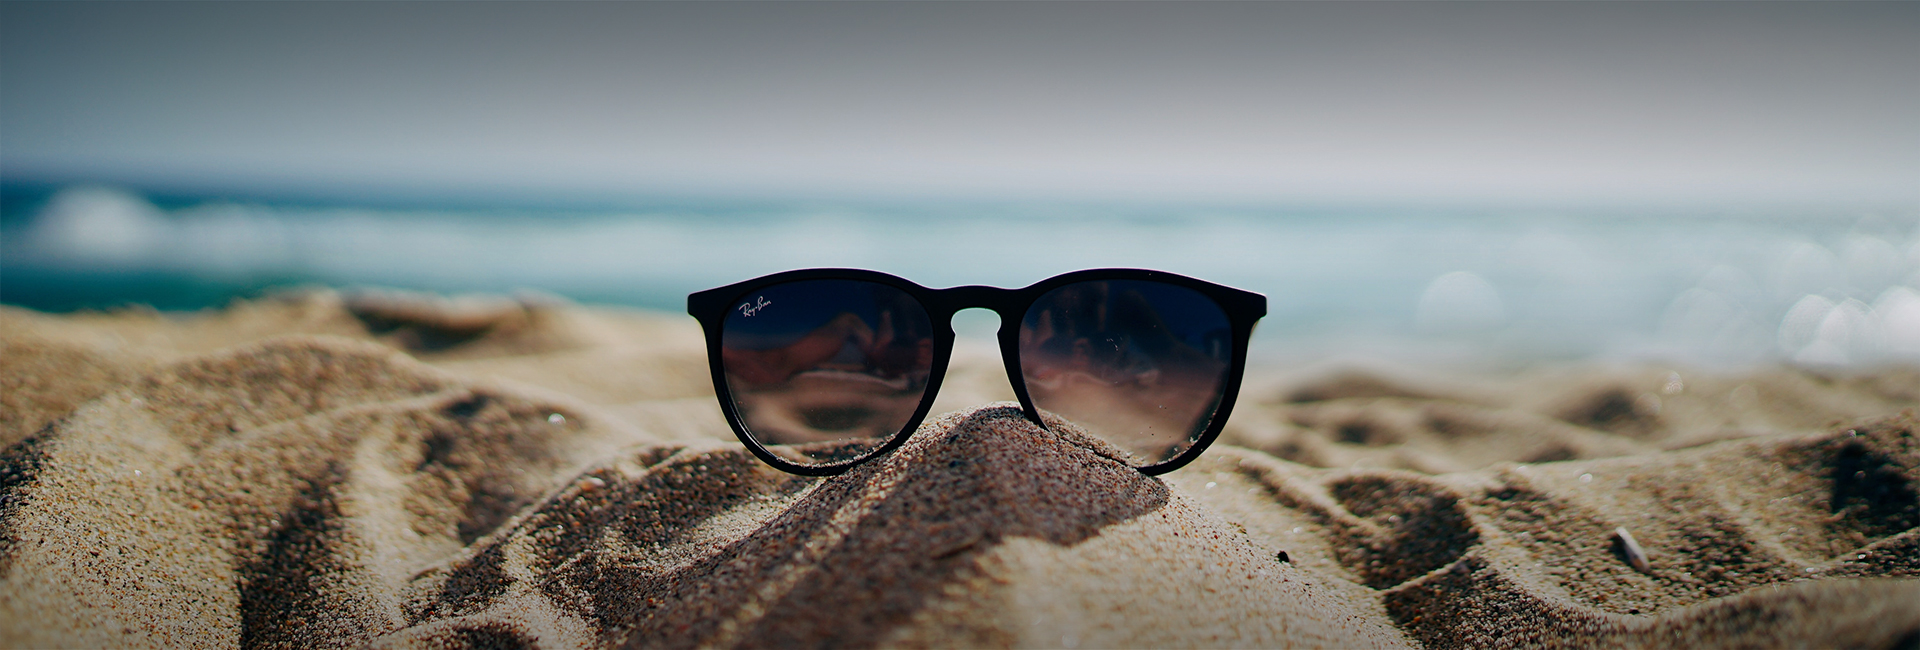 sunglasses in the sand with the ocean in the background